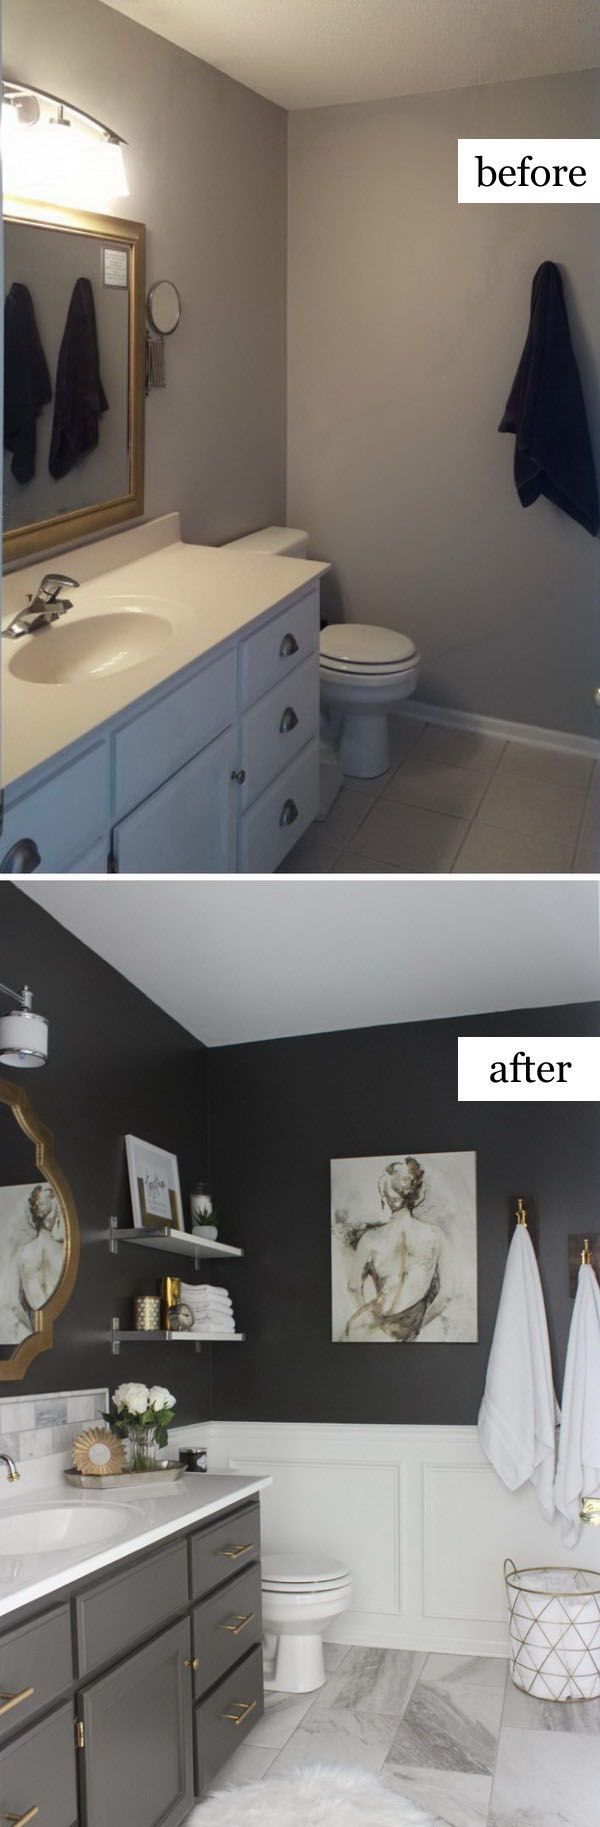 Molding and Trim Transforms Any Space